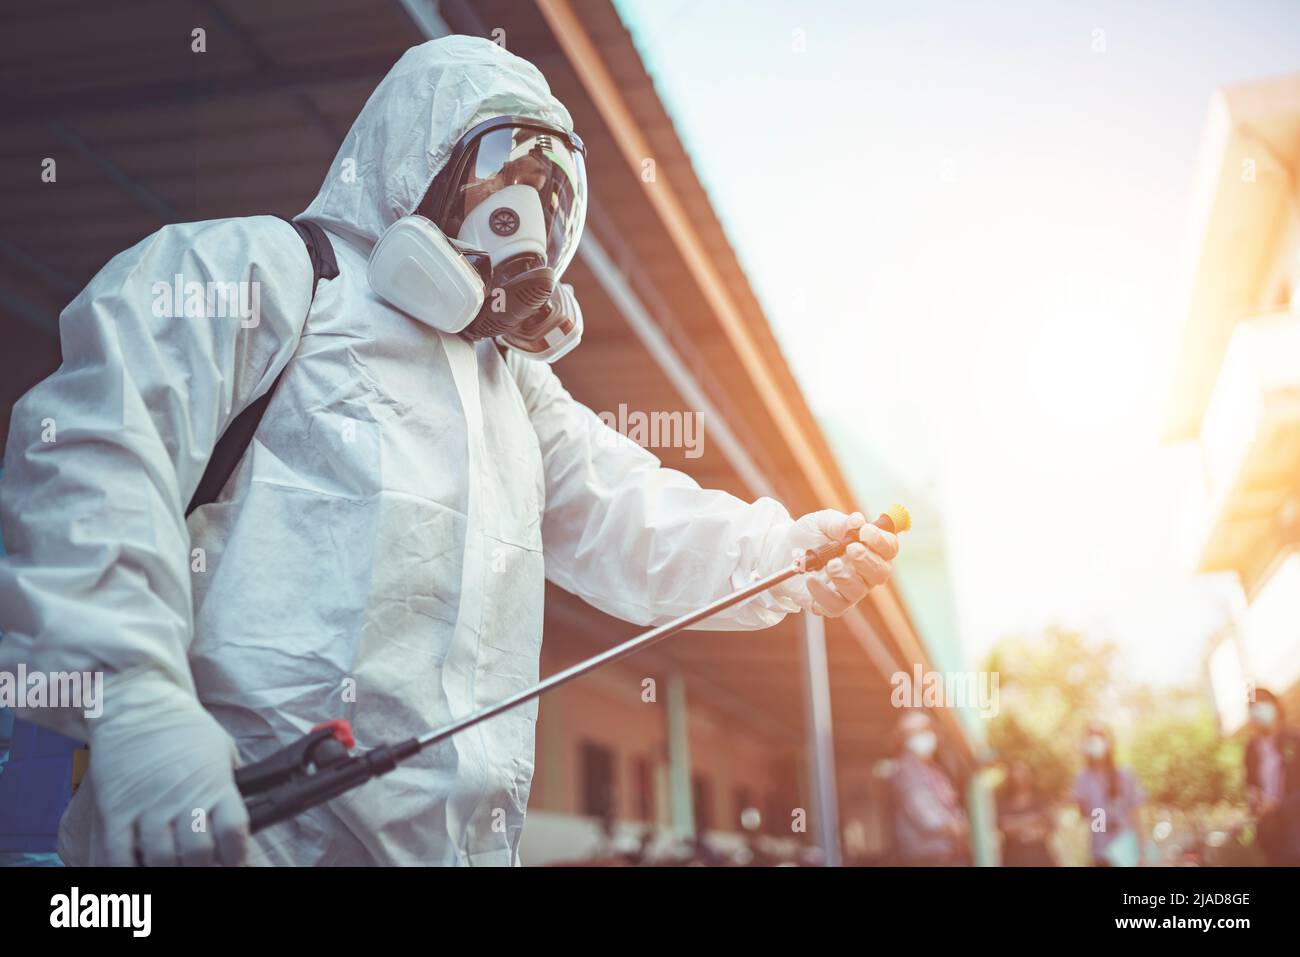 Cleaner in PPE preparing to spray disinfectant Stock Photo